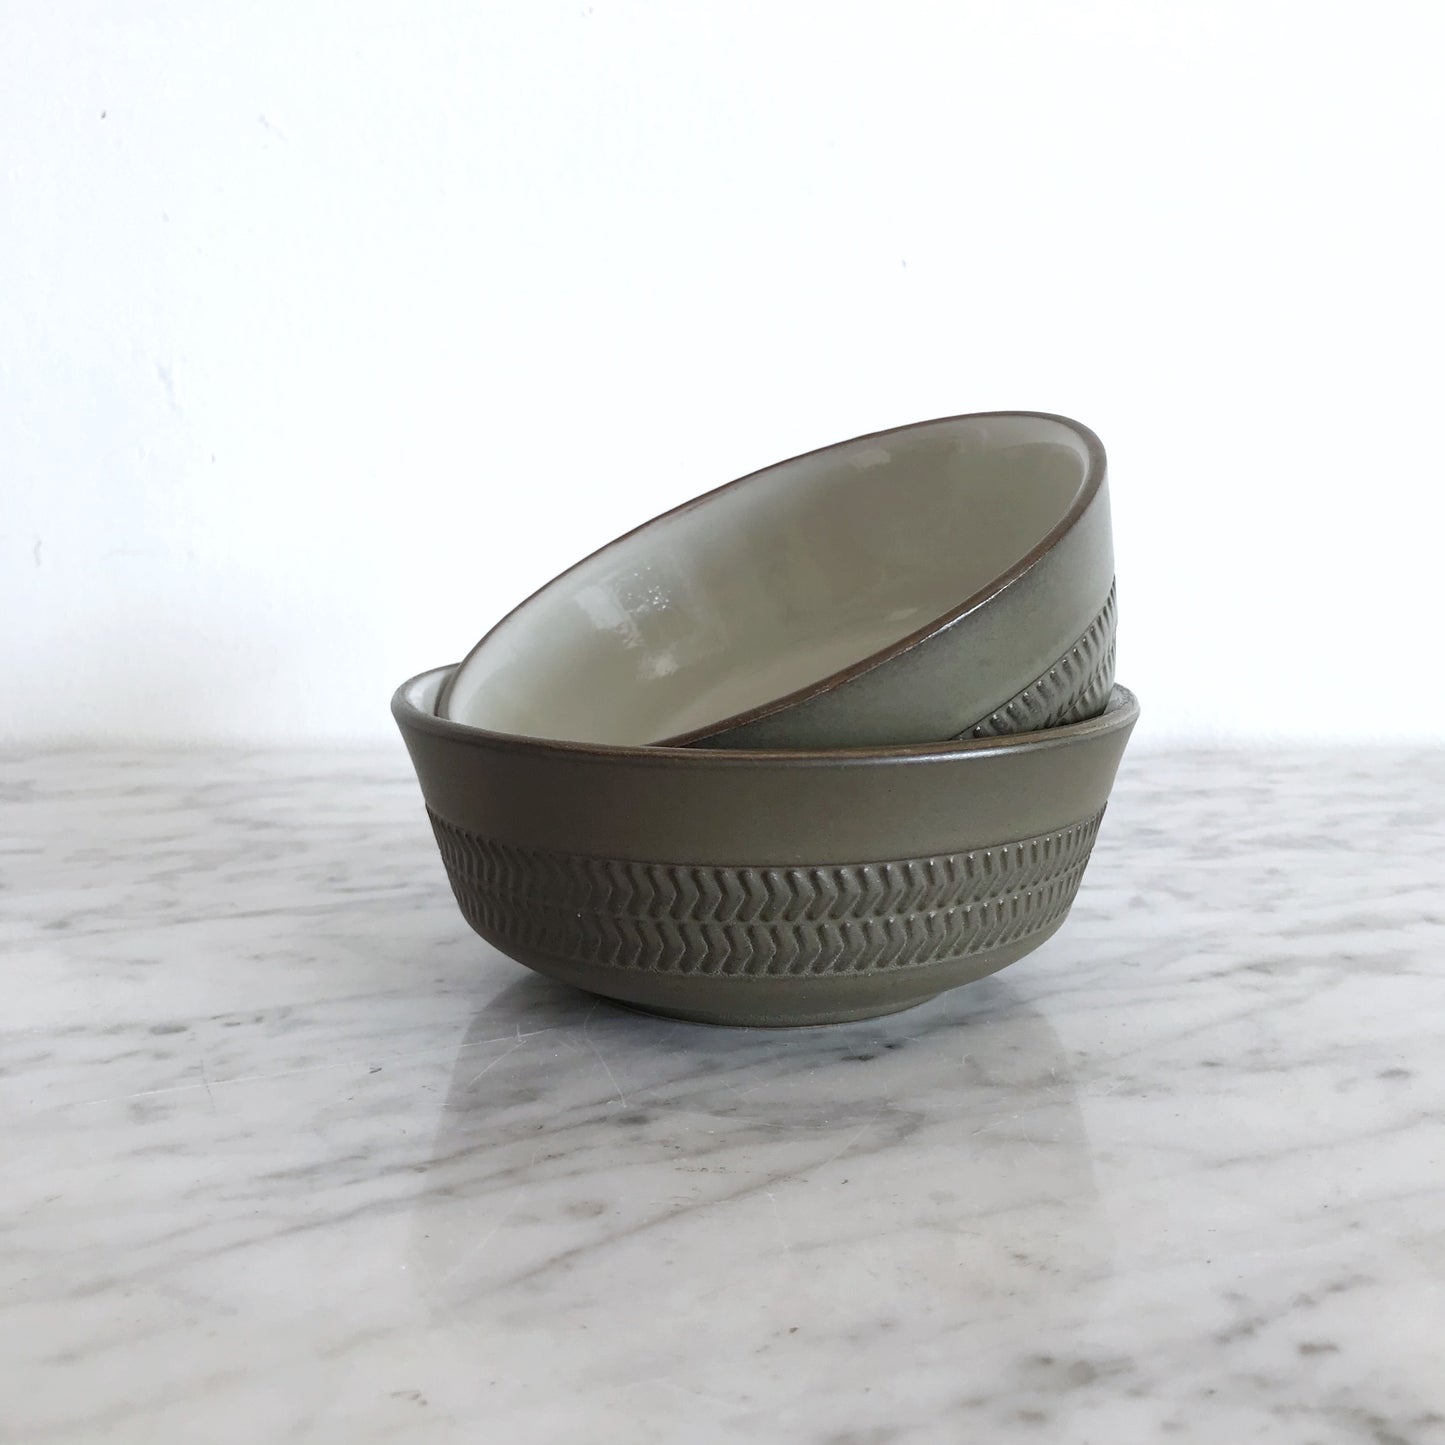 Pair of Vintage Stoneware Bowls by Denby